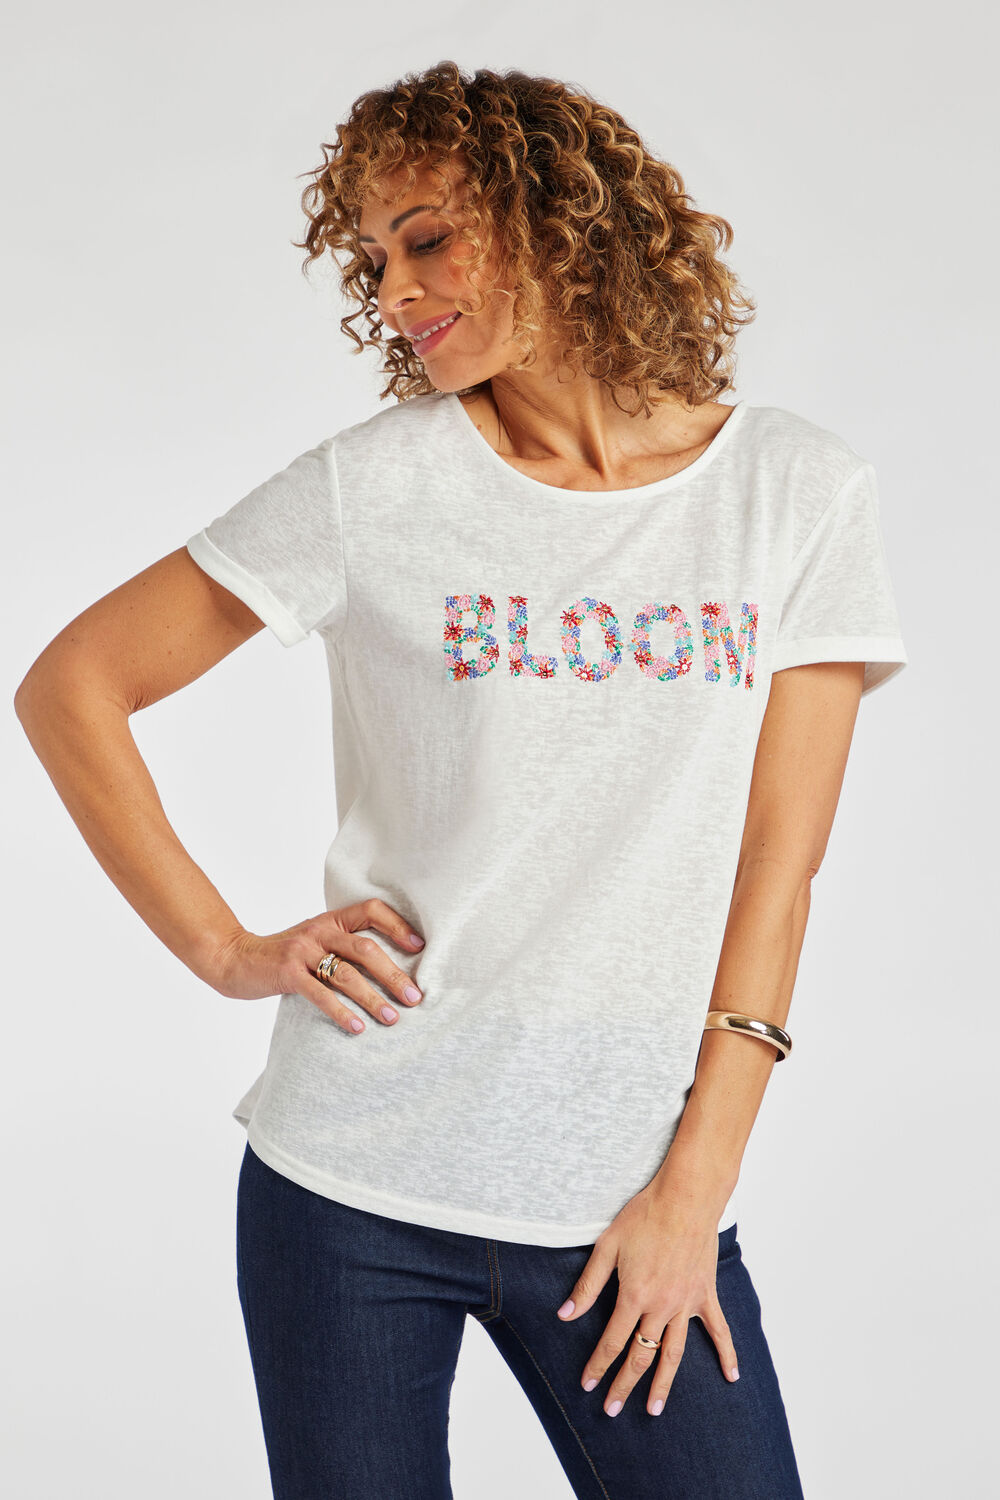 Bonmarche White Short Sleeve Bloom Embroidered T-Shirt, Size: 14